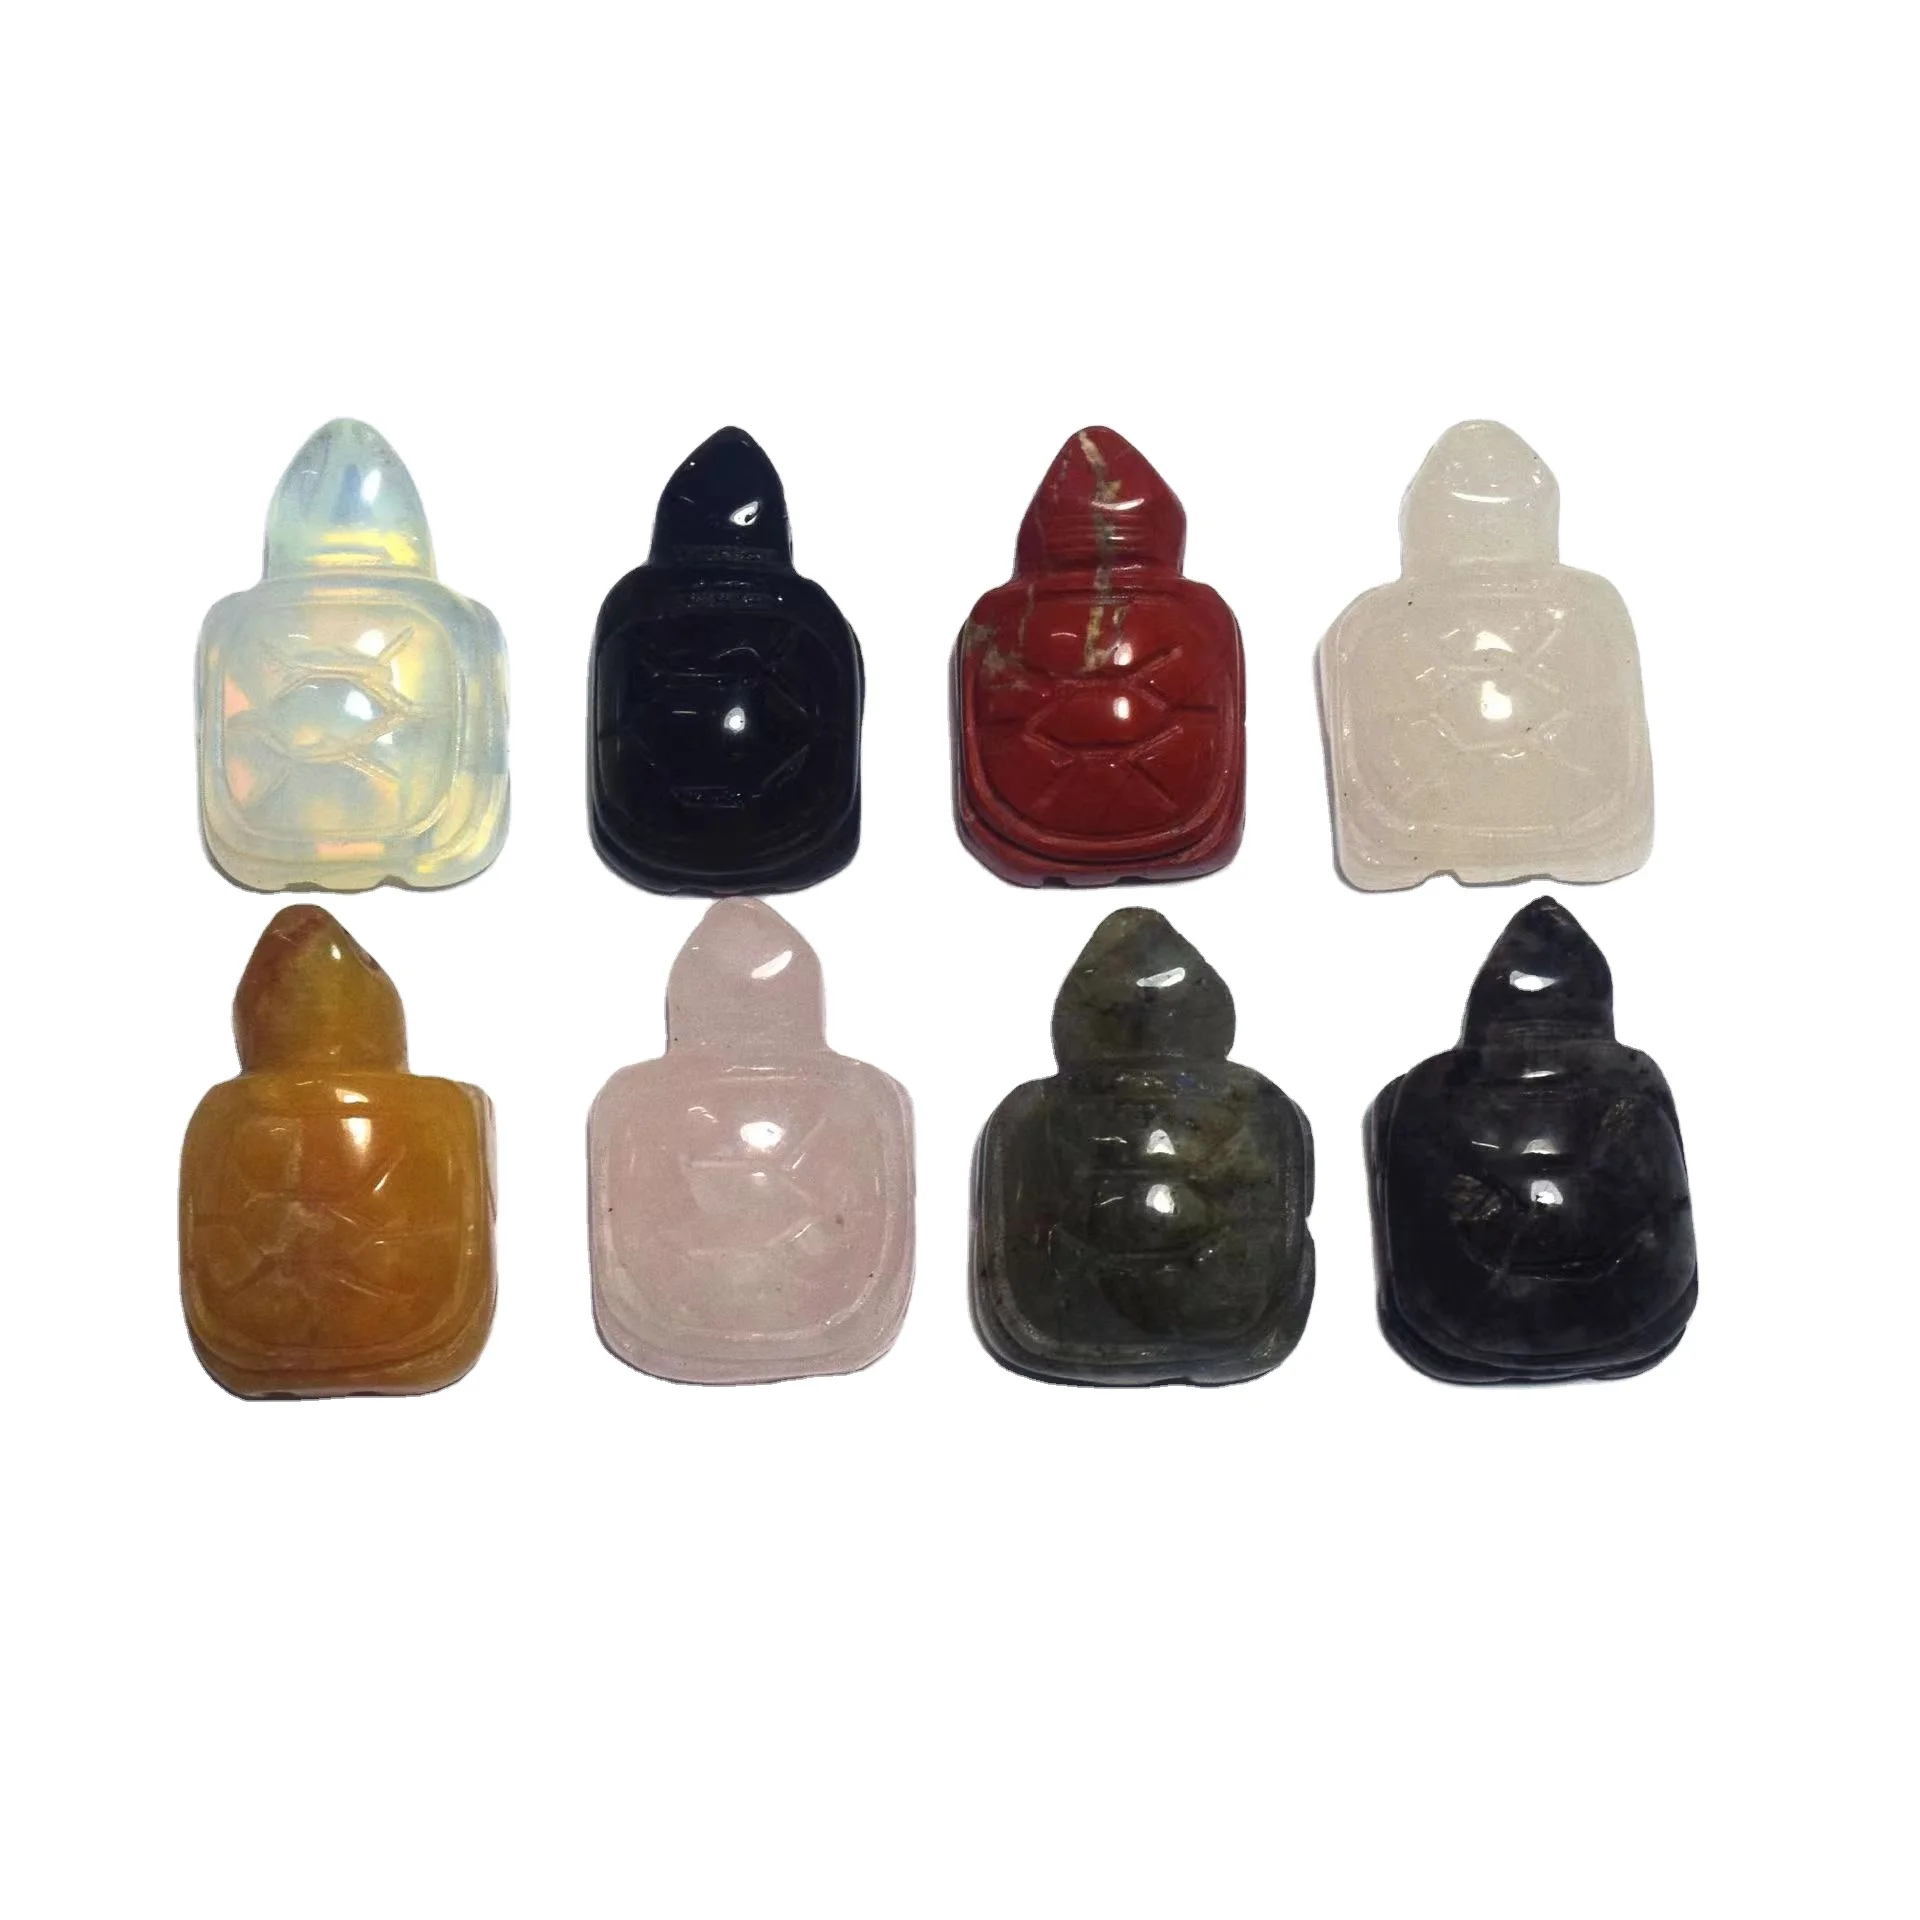 

Wholesale Hot sale Natural Quartz Carved Cute Animal Turtle Healing gemstone Crystal Tortoise Animal Carving for gift